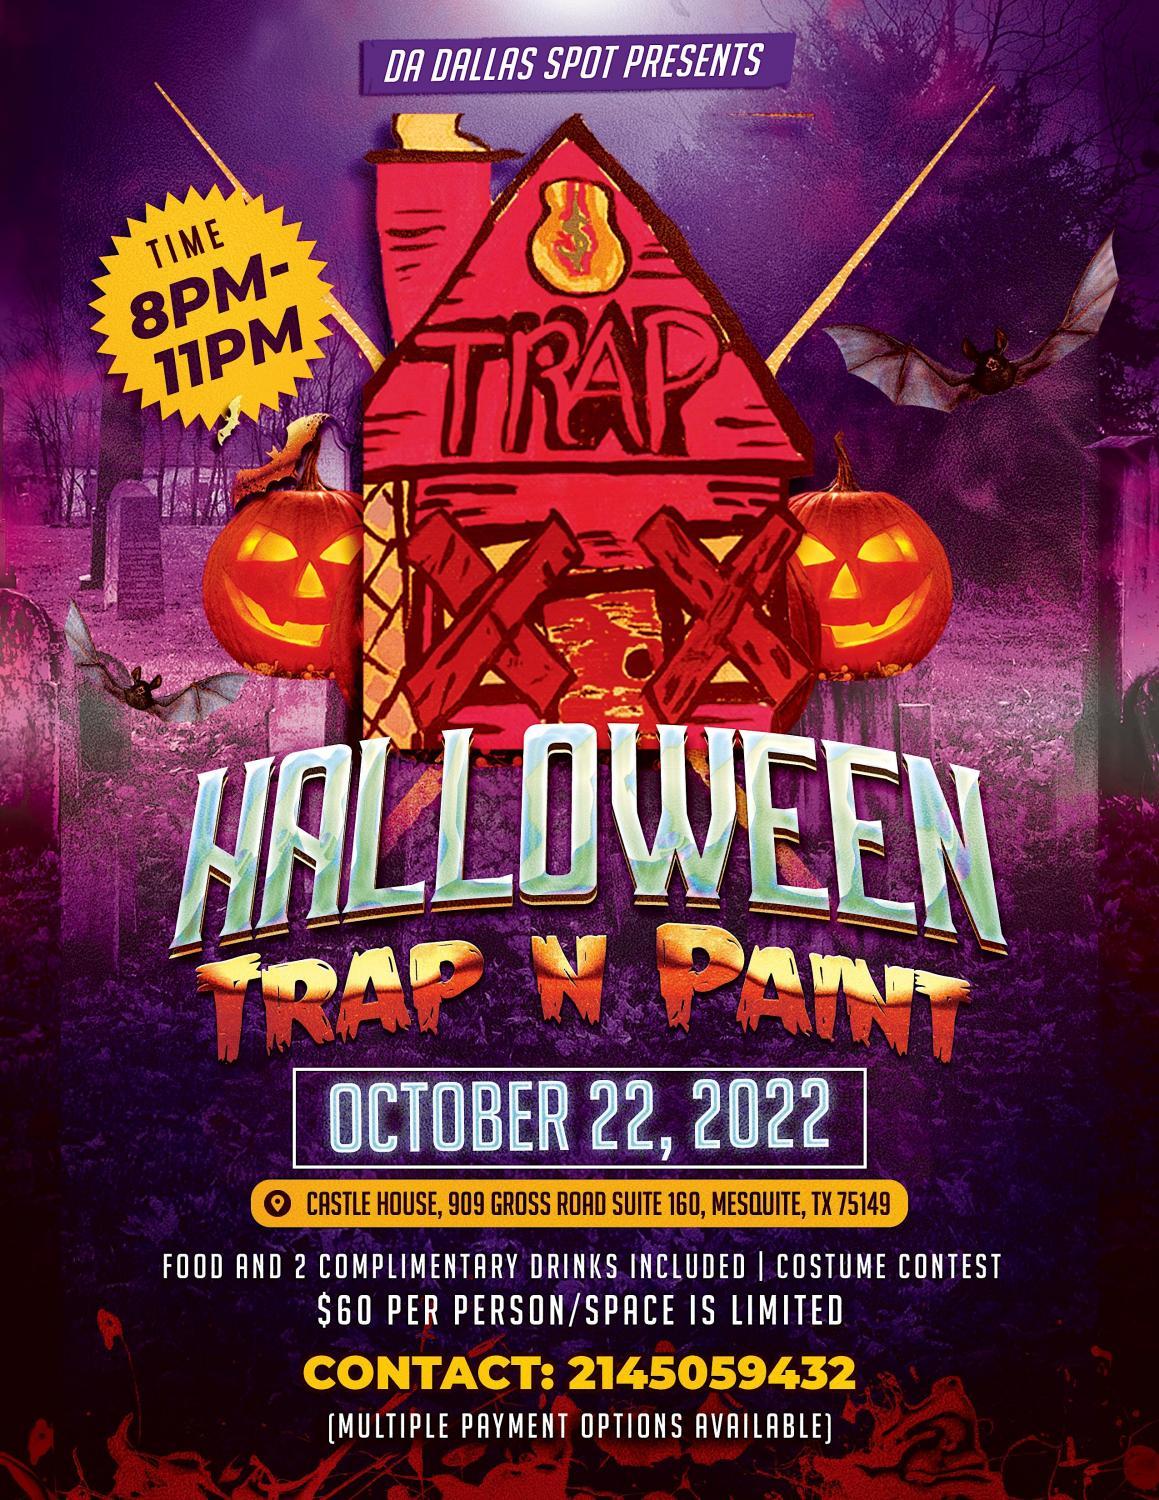 Halloween Trap n Paint
Sat Oct 22, 8:00 PM - Sat Oct 22, 11:00 PM
in 2 days